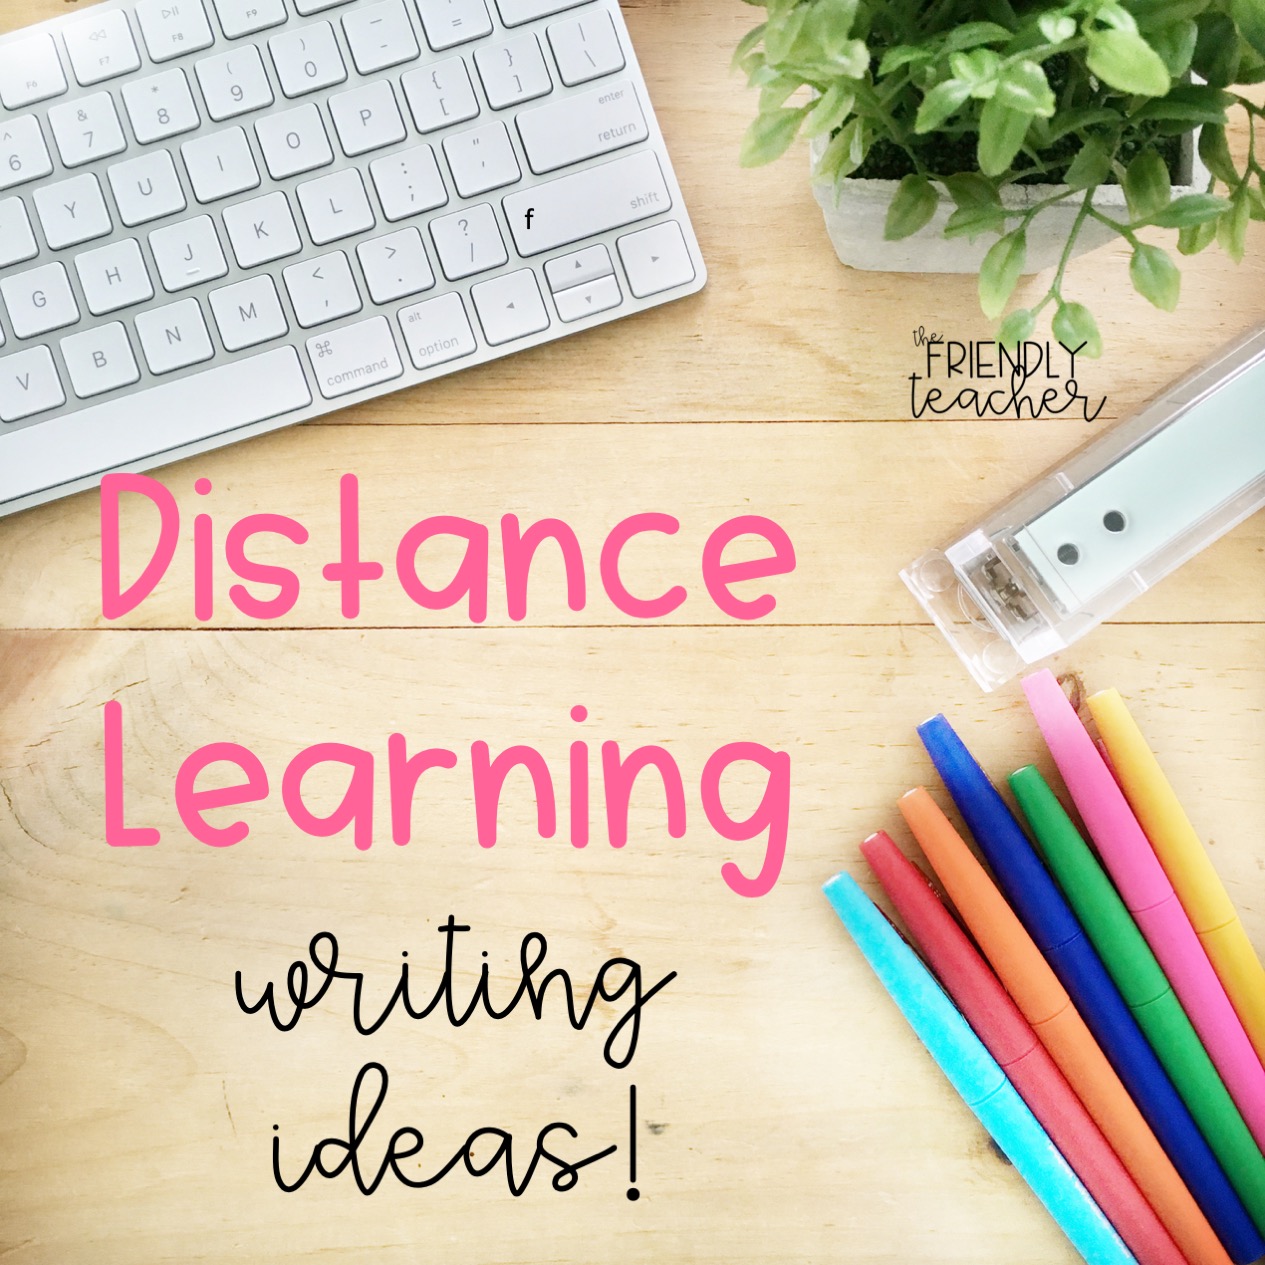 distance learning creative writing degrees